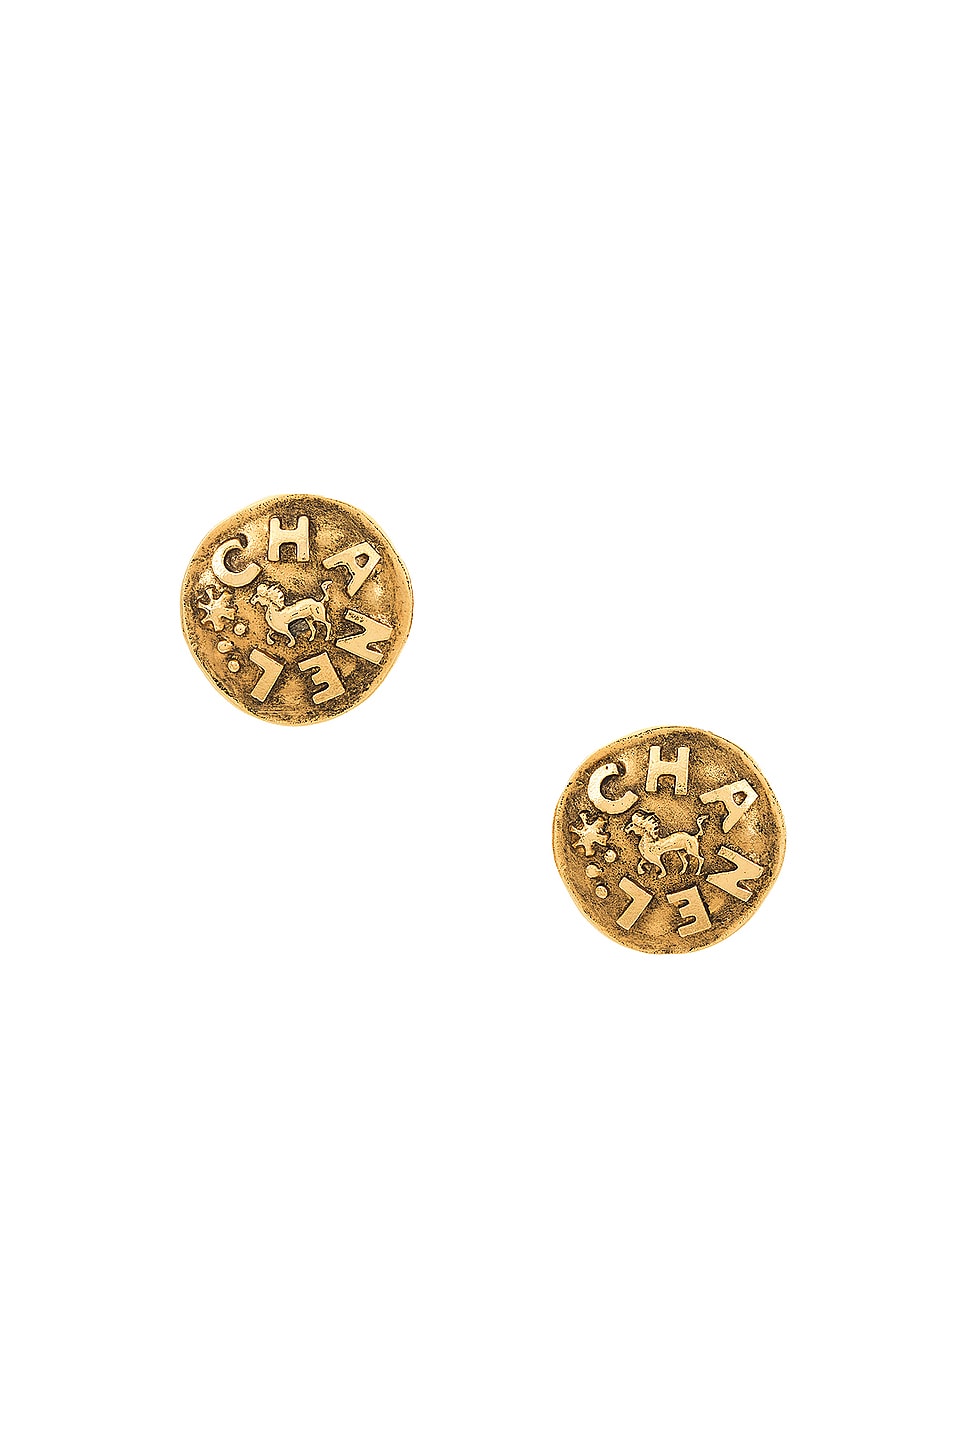 Image 1 of FWRD Renew Chanel Coco Mark Earrings in Gold